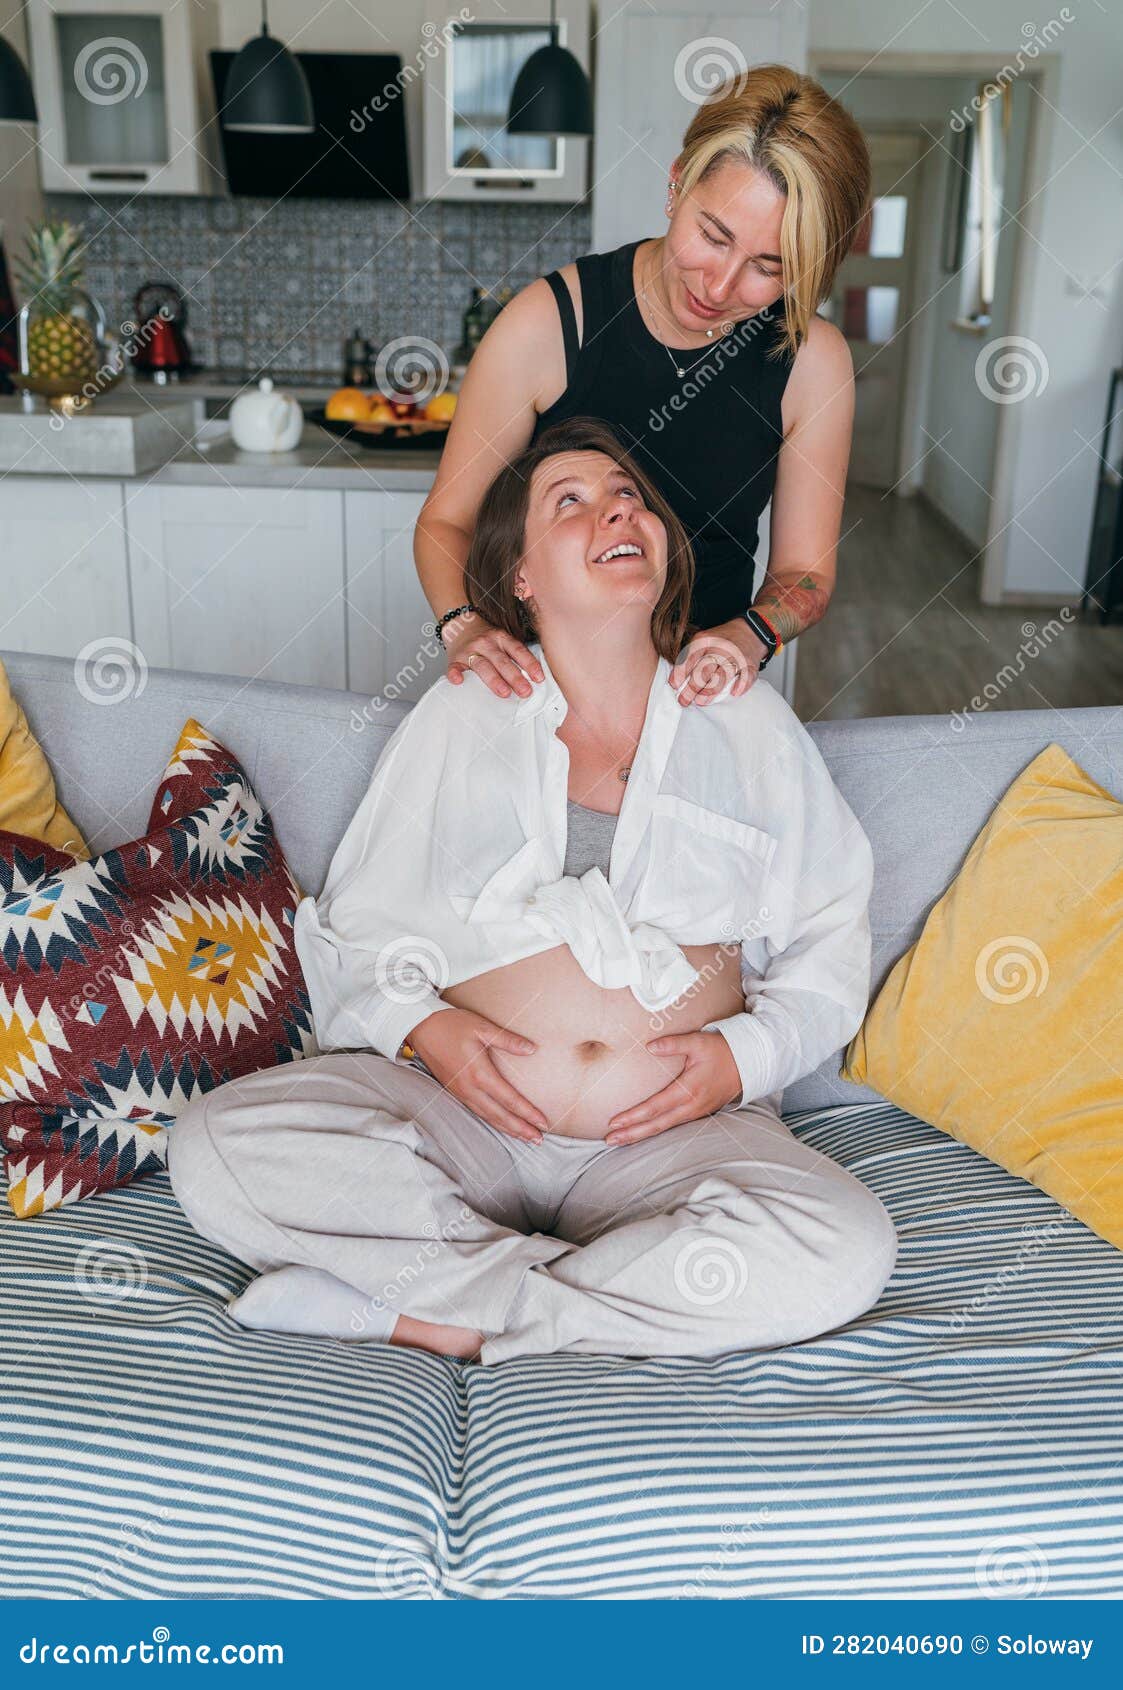 Young Woman Tender Touching Partner S Female Pregnant Belly photo